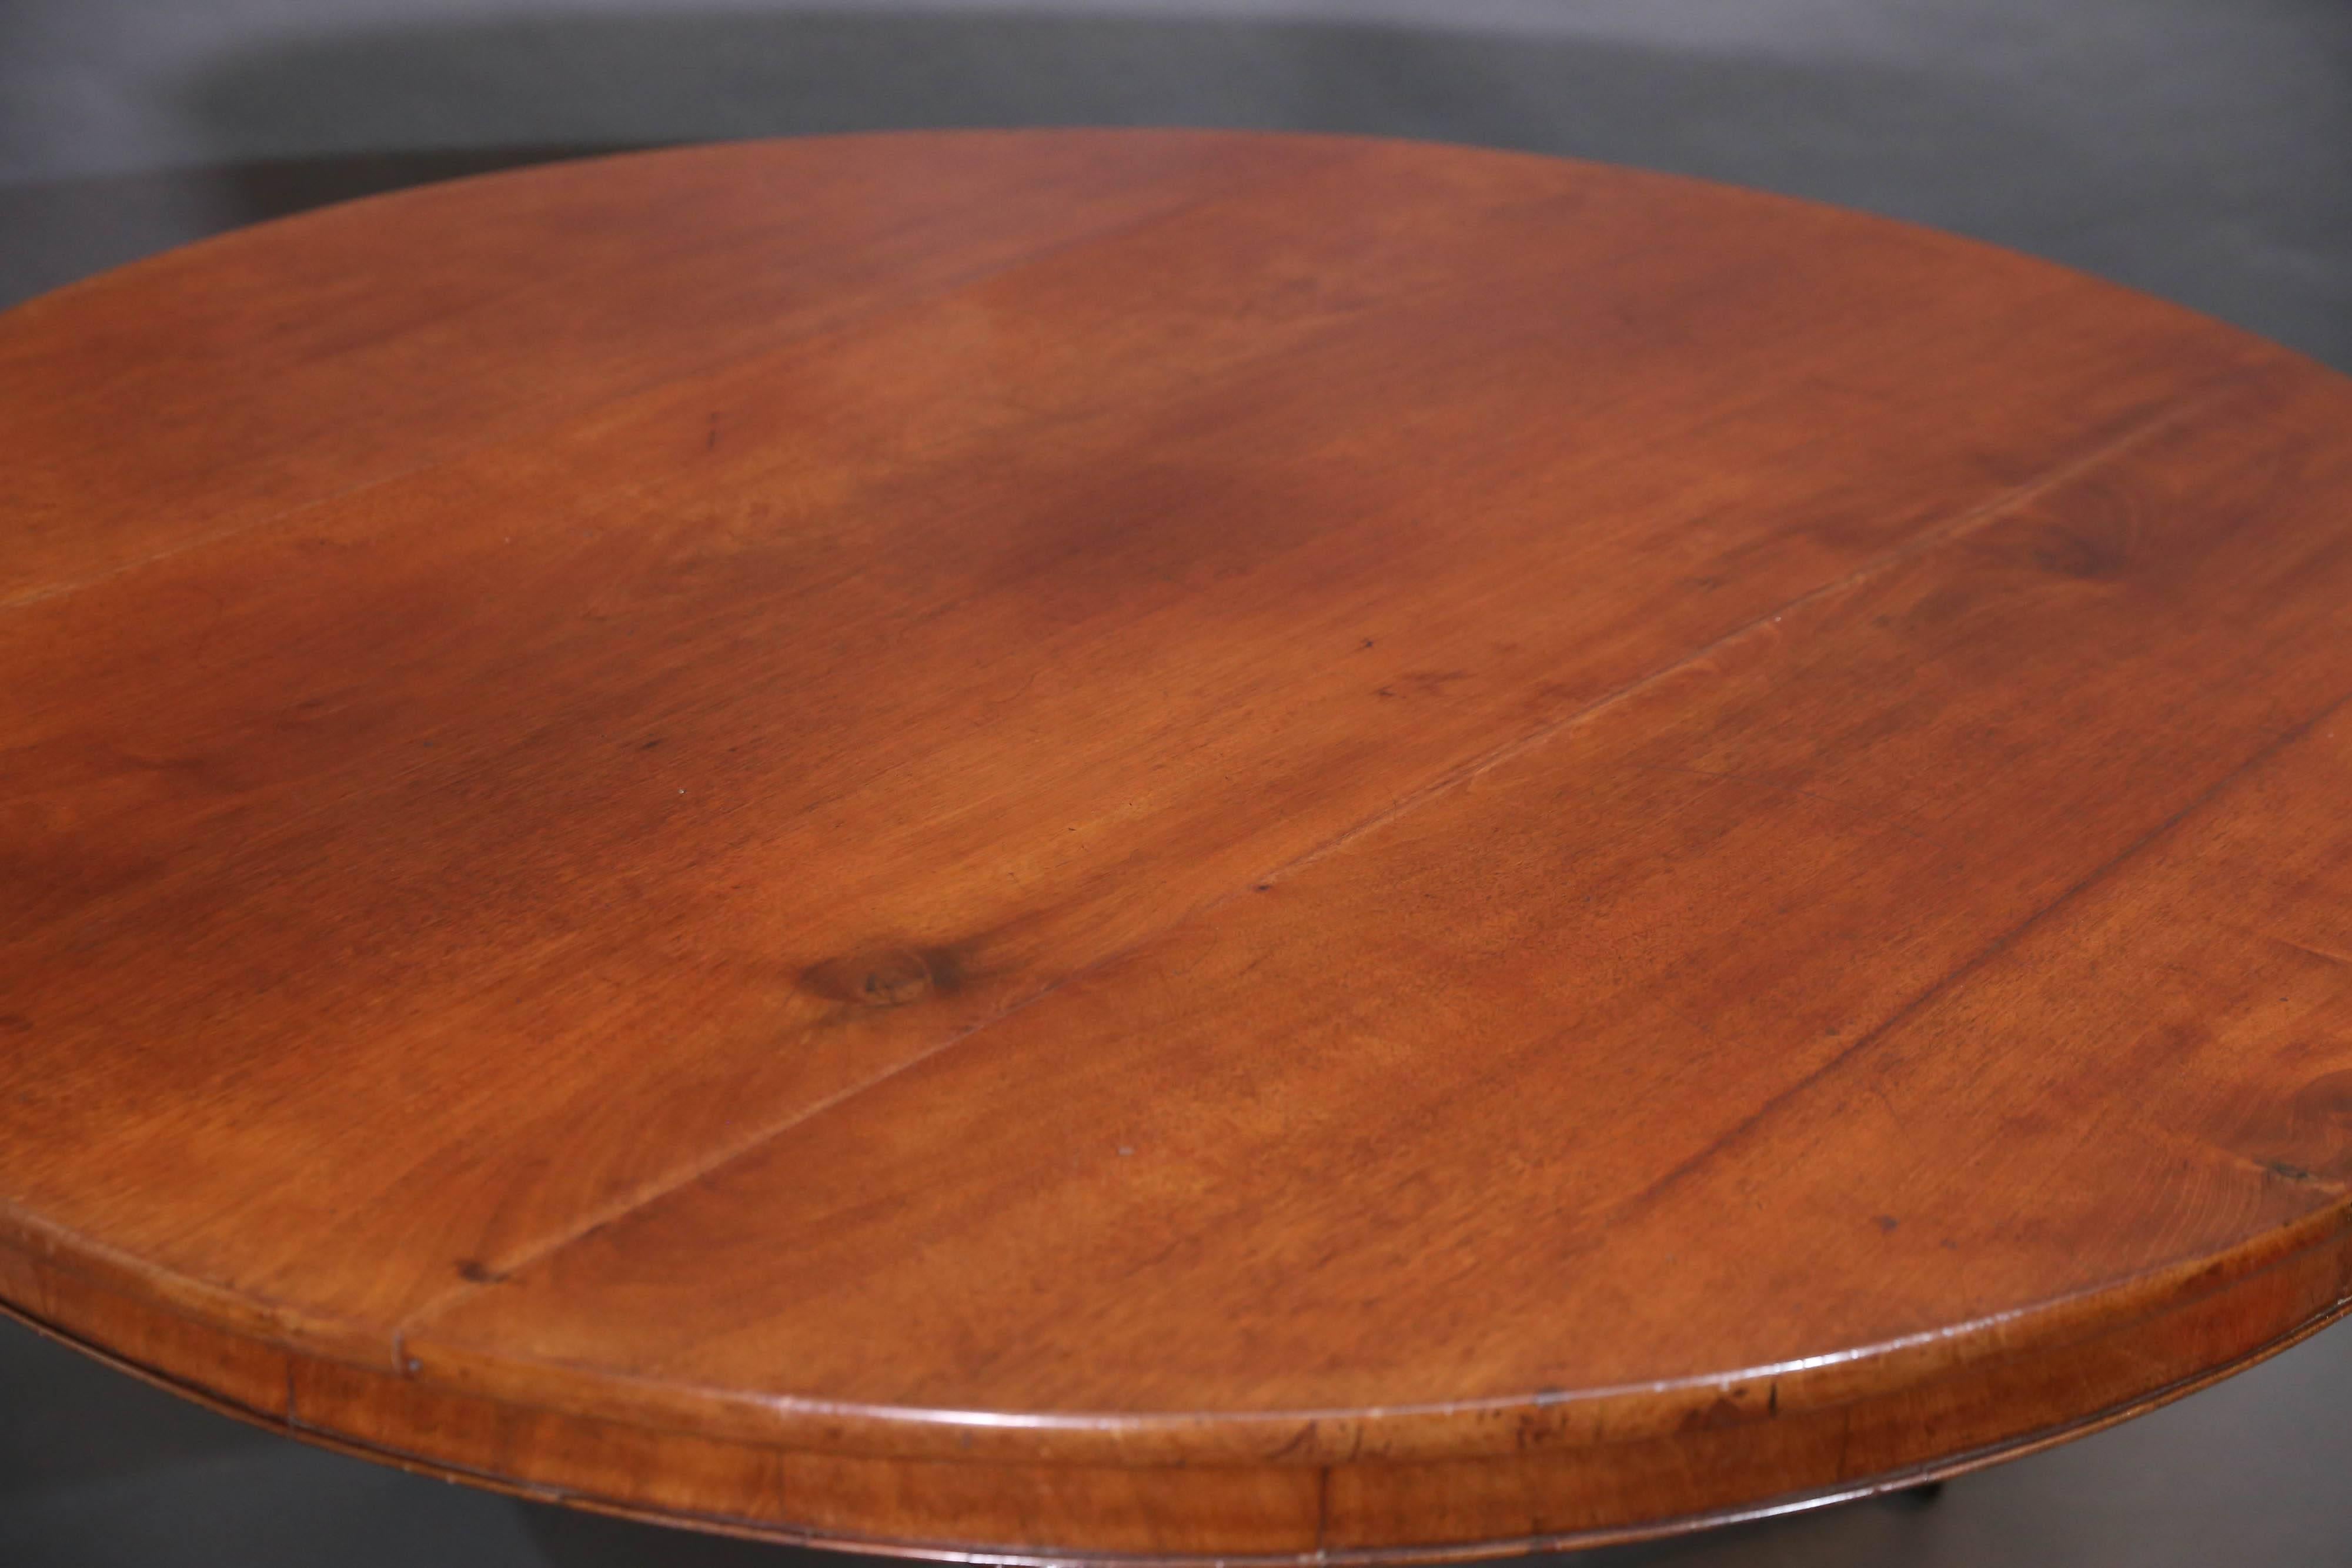 Period English Regency round tilt-top table with solid mahogany top and 
 Circular pedestal base resting on three legs on brass casters.

Apron is 3